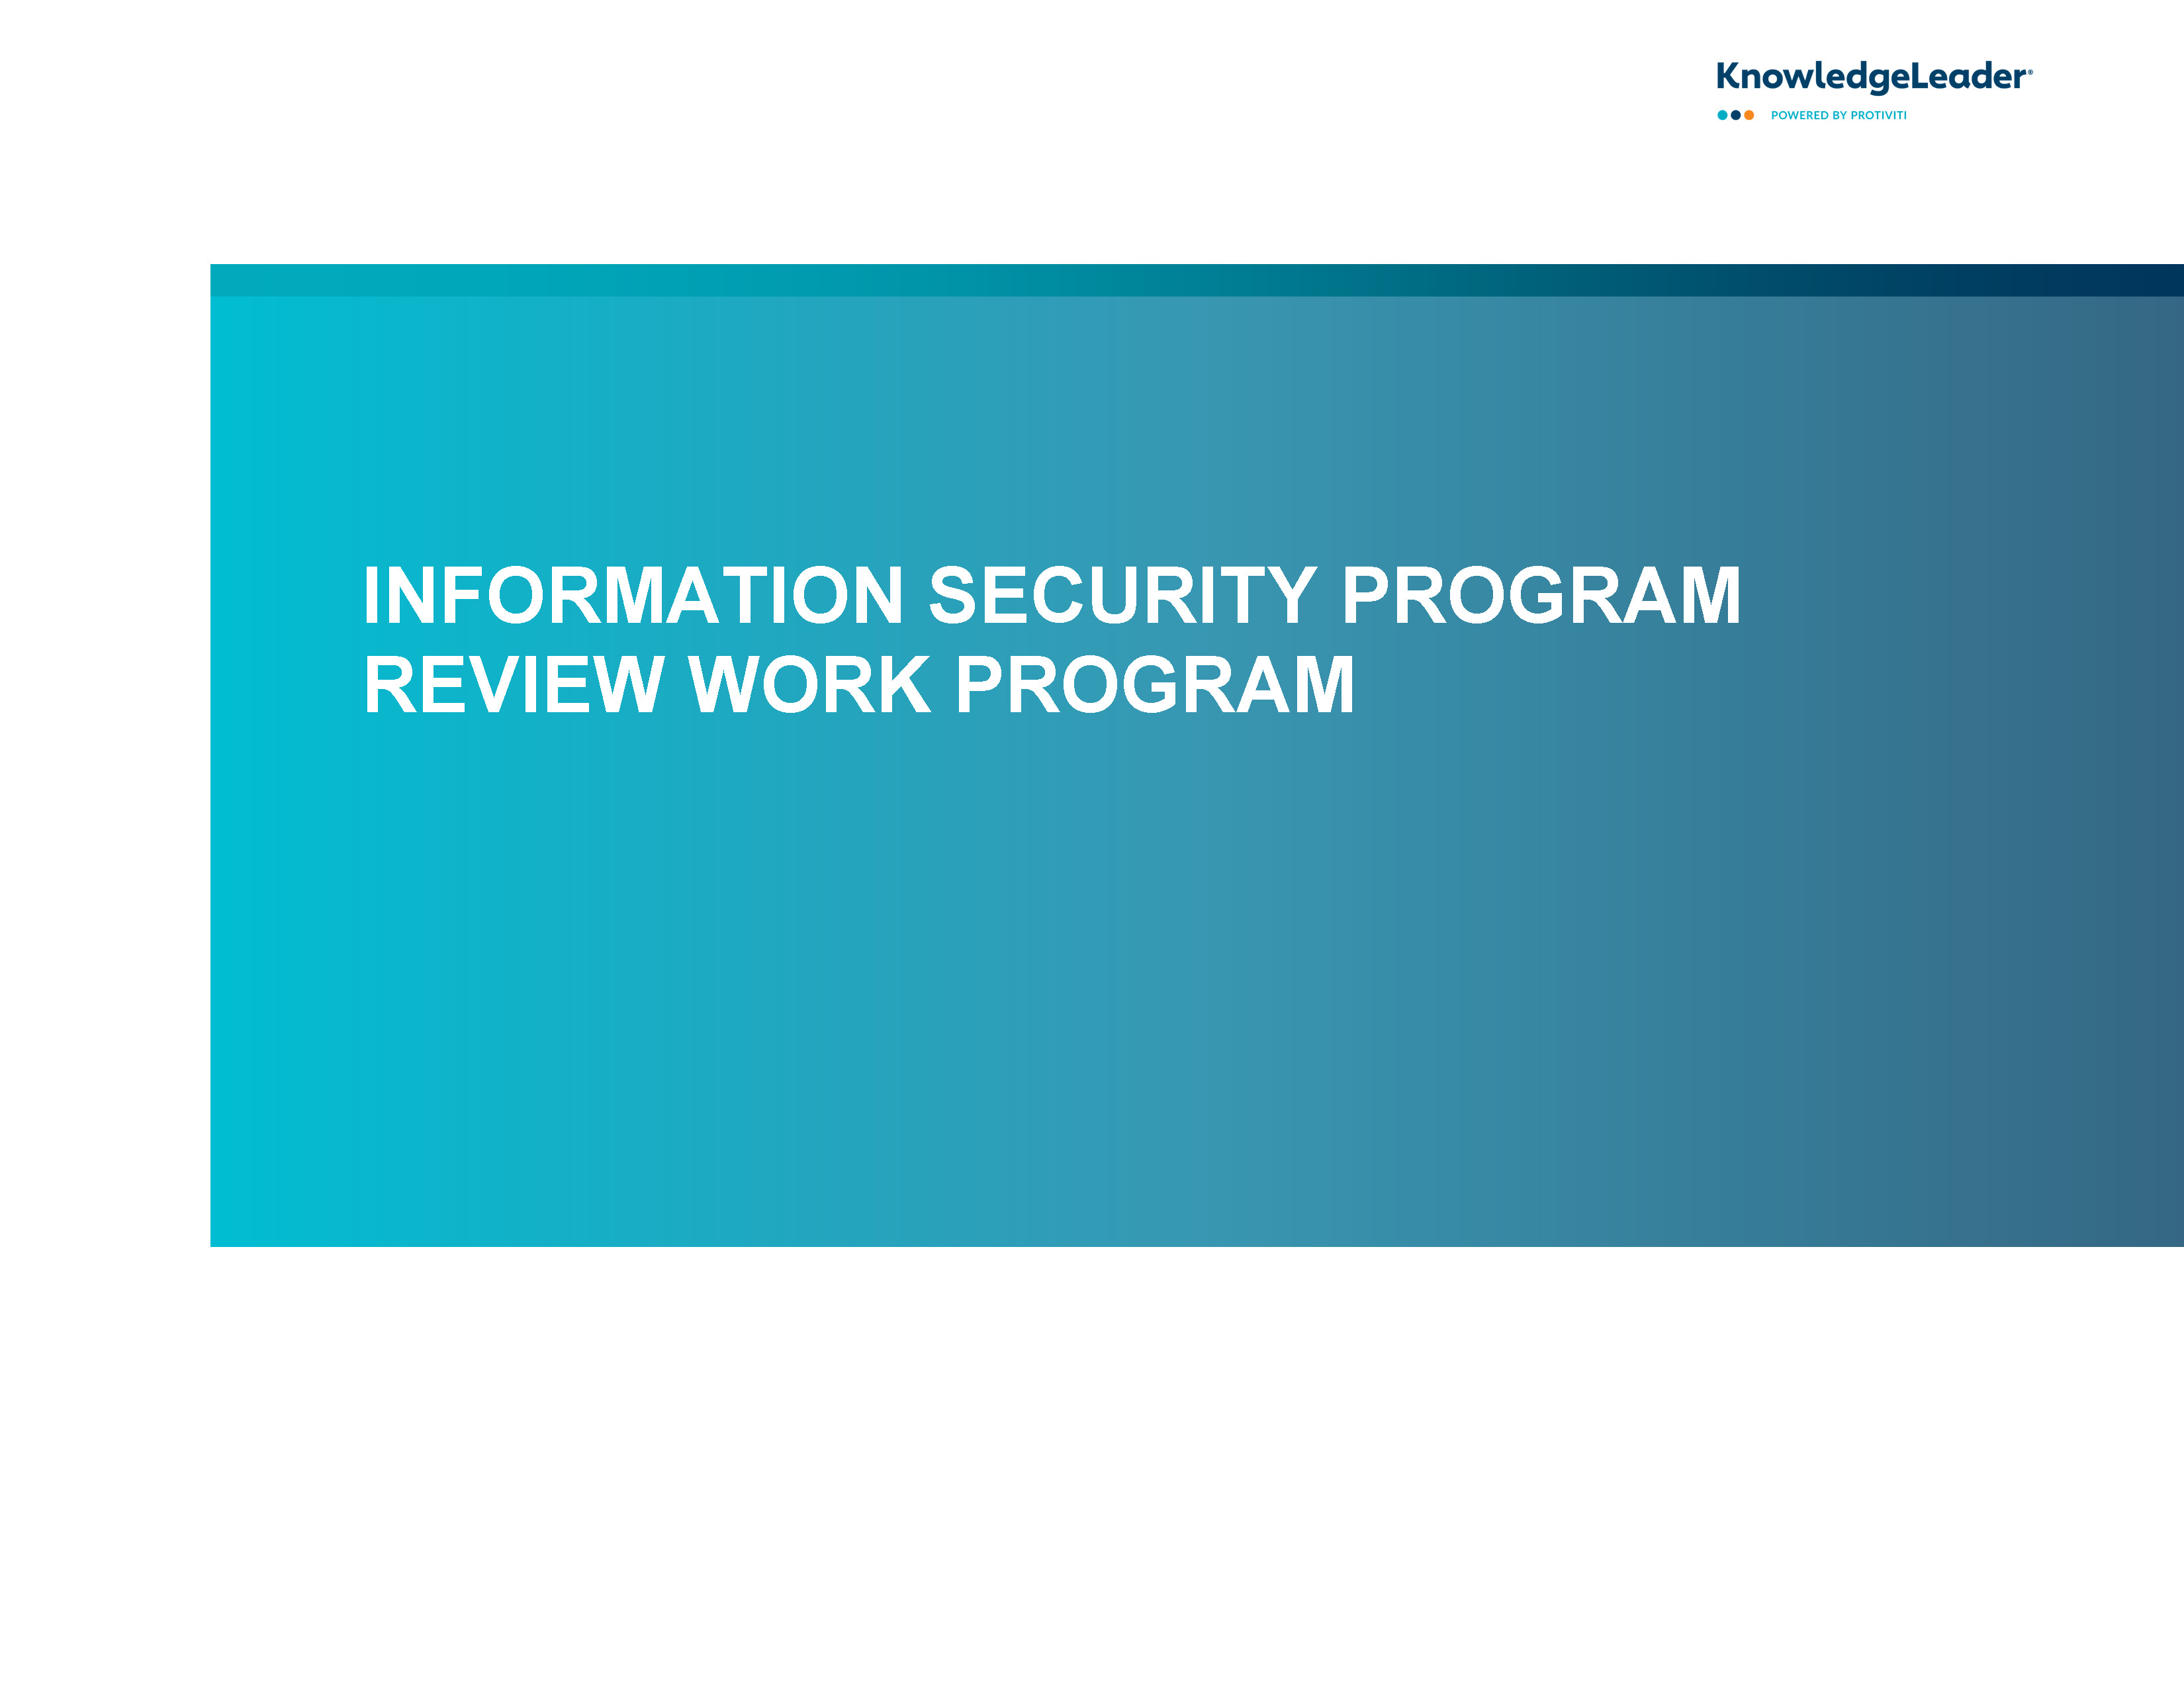 Screenshot of the first page of Information Security Work Program